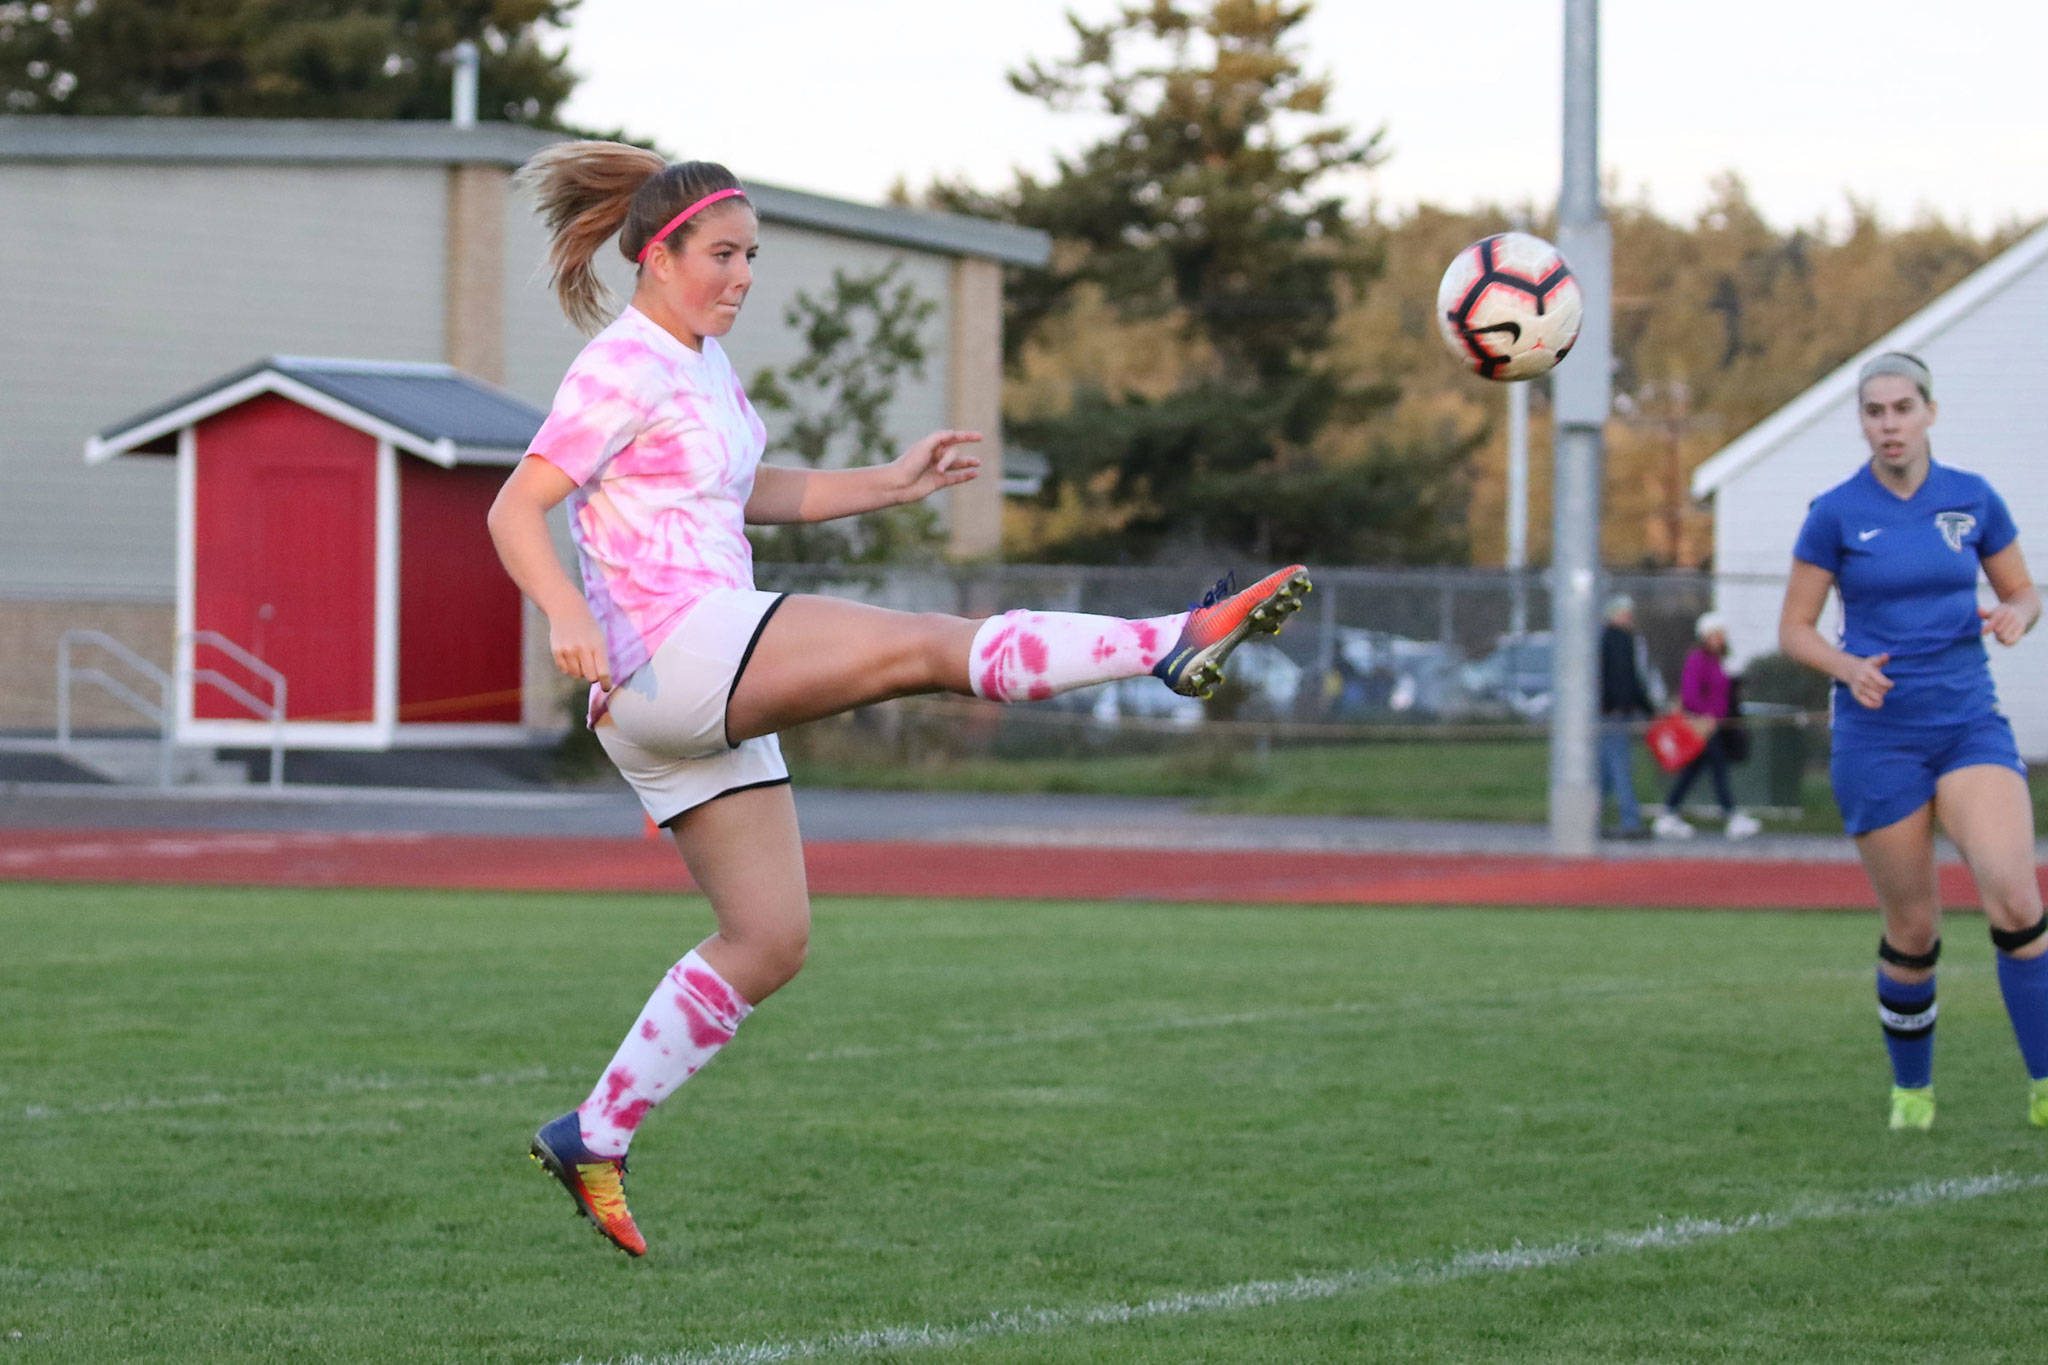 Coupeville’s Natalie Hollrigel boots the ball in the Wolves’ match with South Whidbey Tuesday.(Photo by John Fisken)